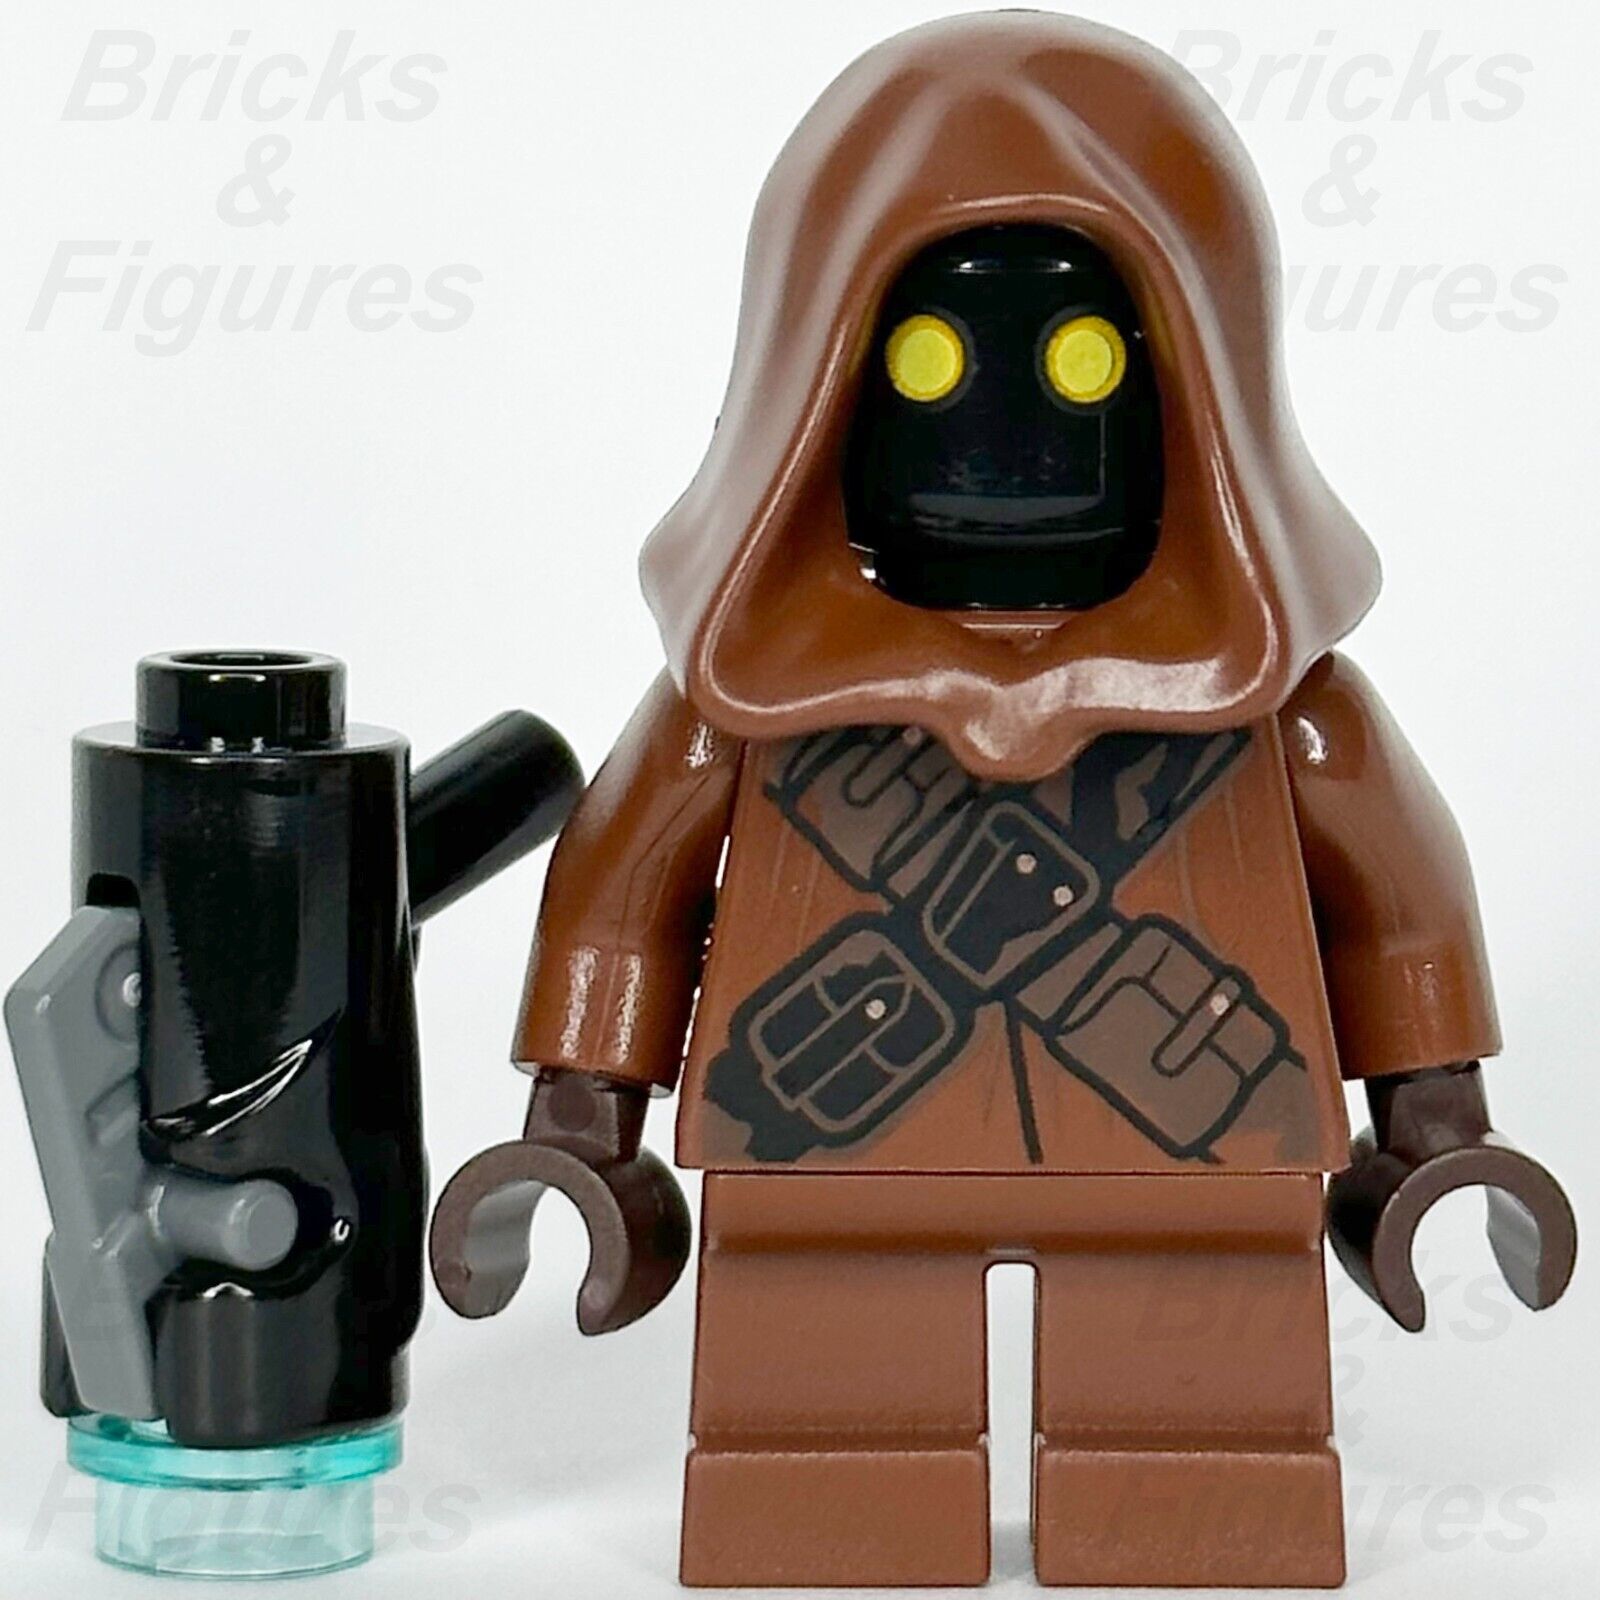 LEGO Star Wars Jawa Minifigure A New Hope Strap Black Stains 75220 75198 sw0896